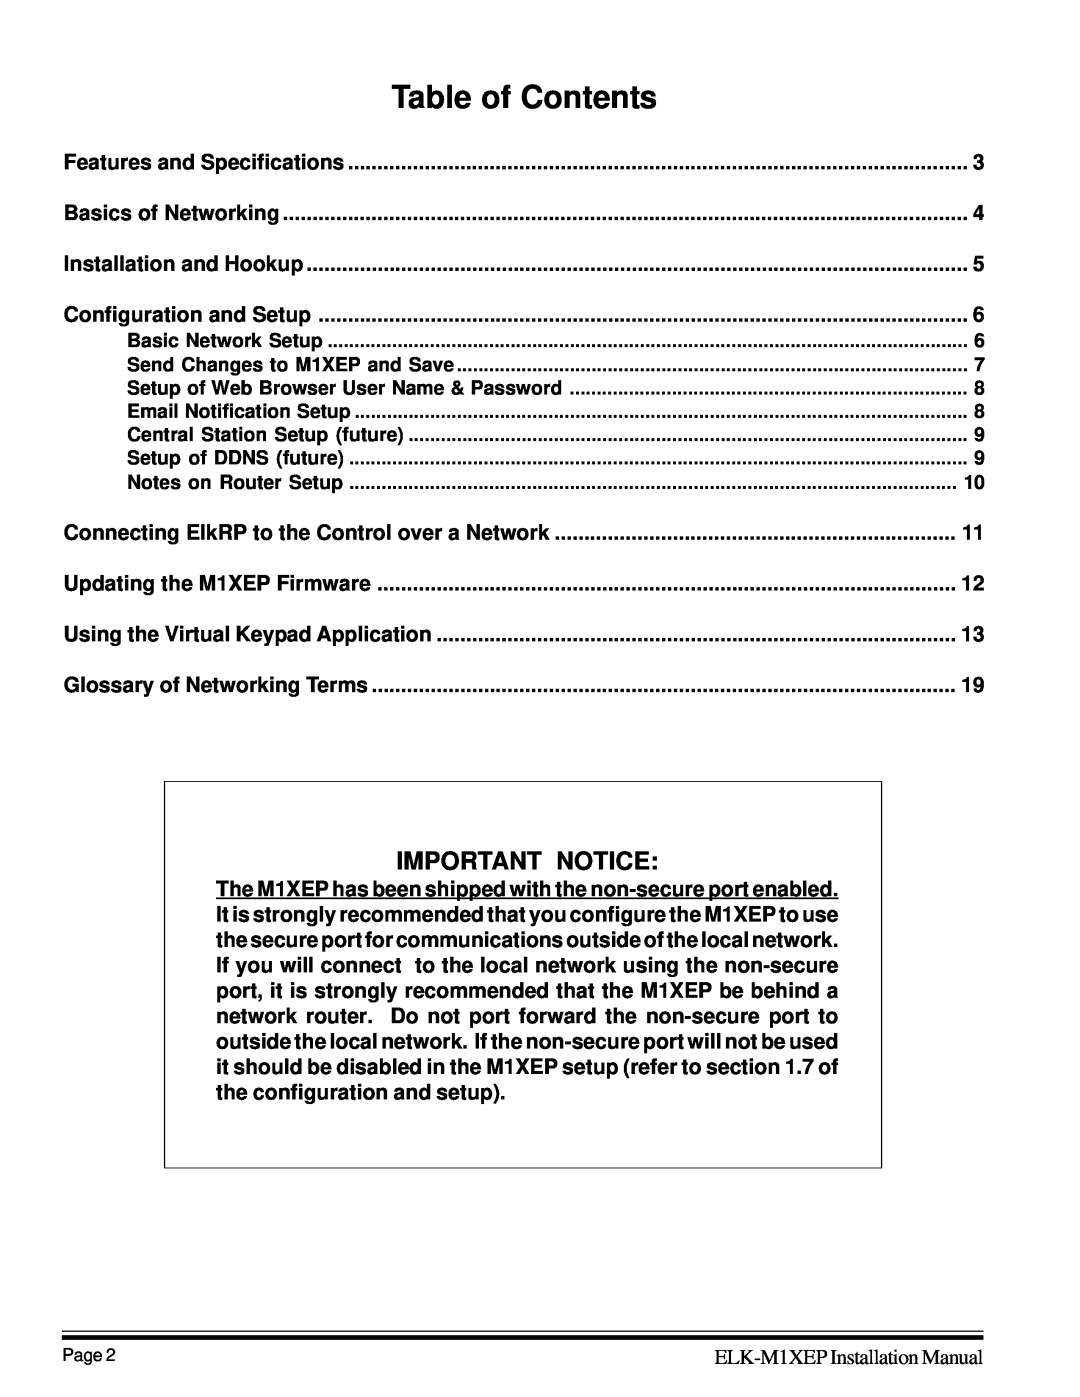 Elk M1XEP installation manual Table of Contents, Important Notice 